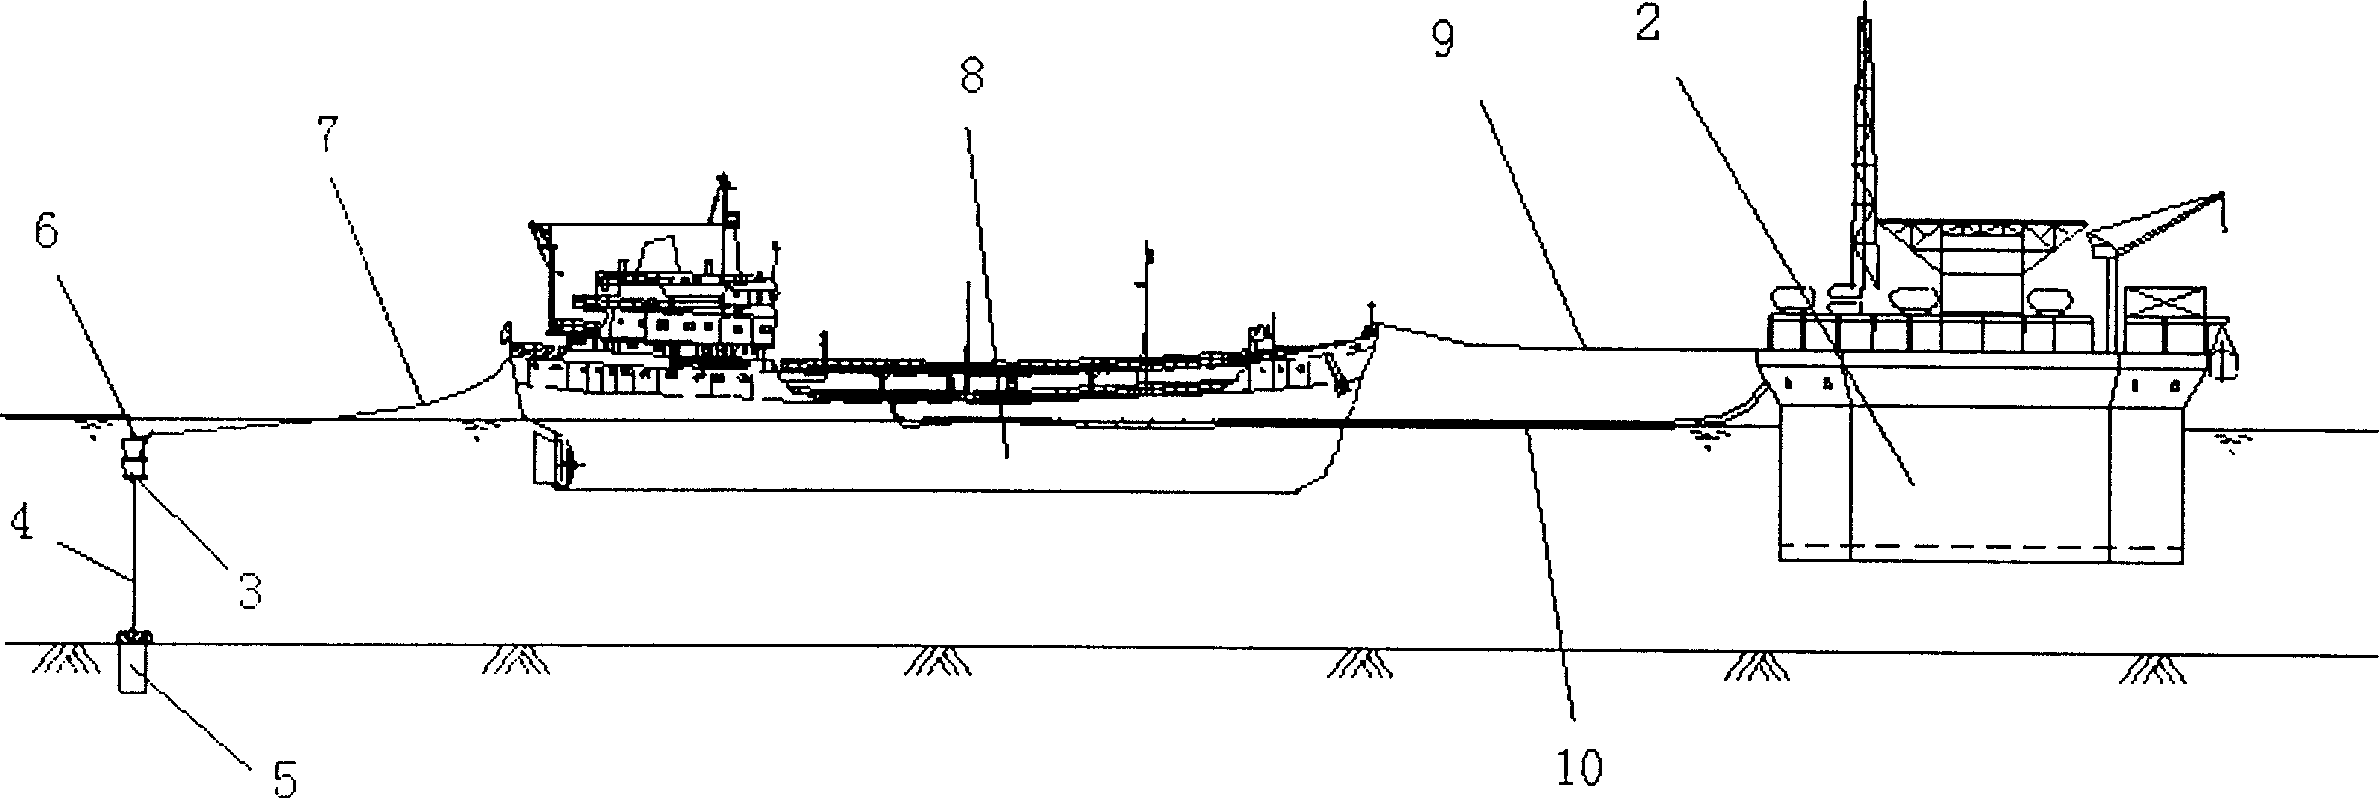 Flexible connection berthing method and apparatus for transferring oil on sea